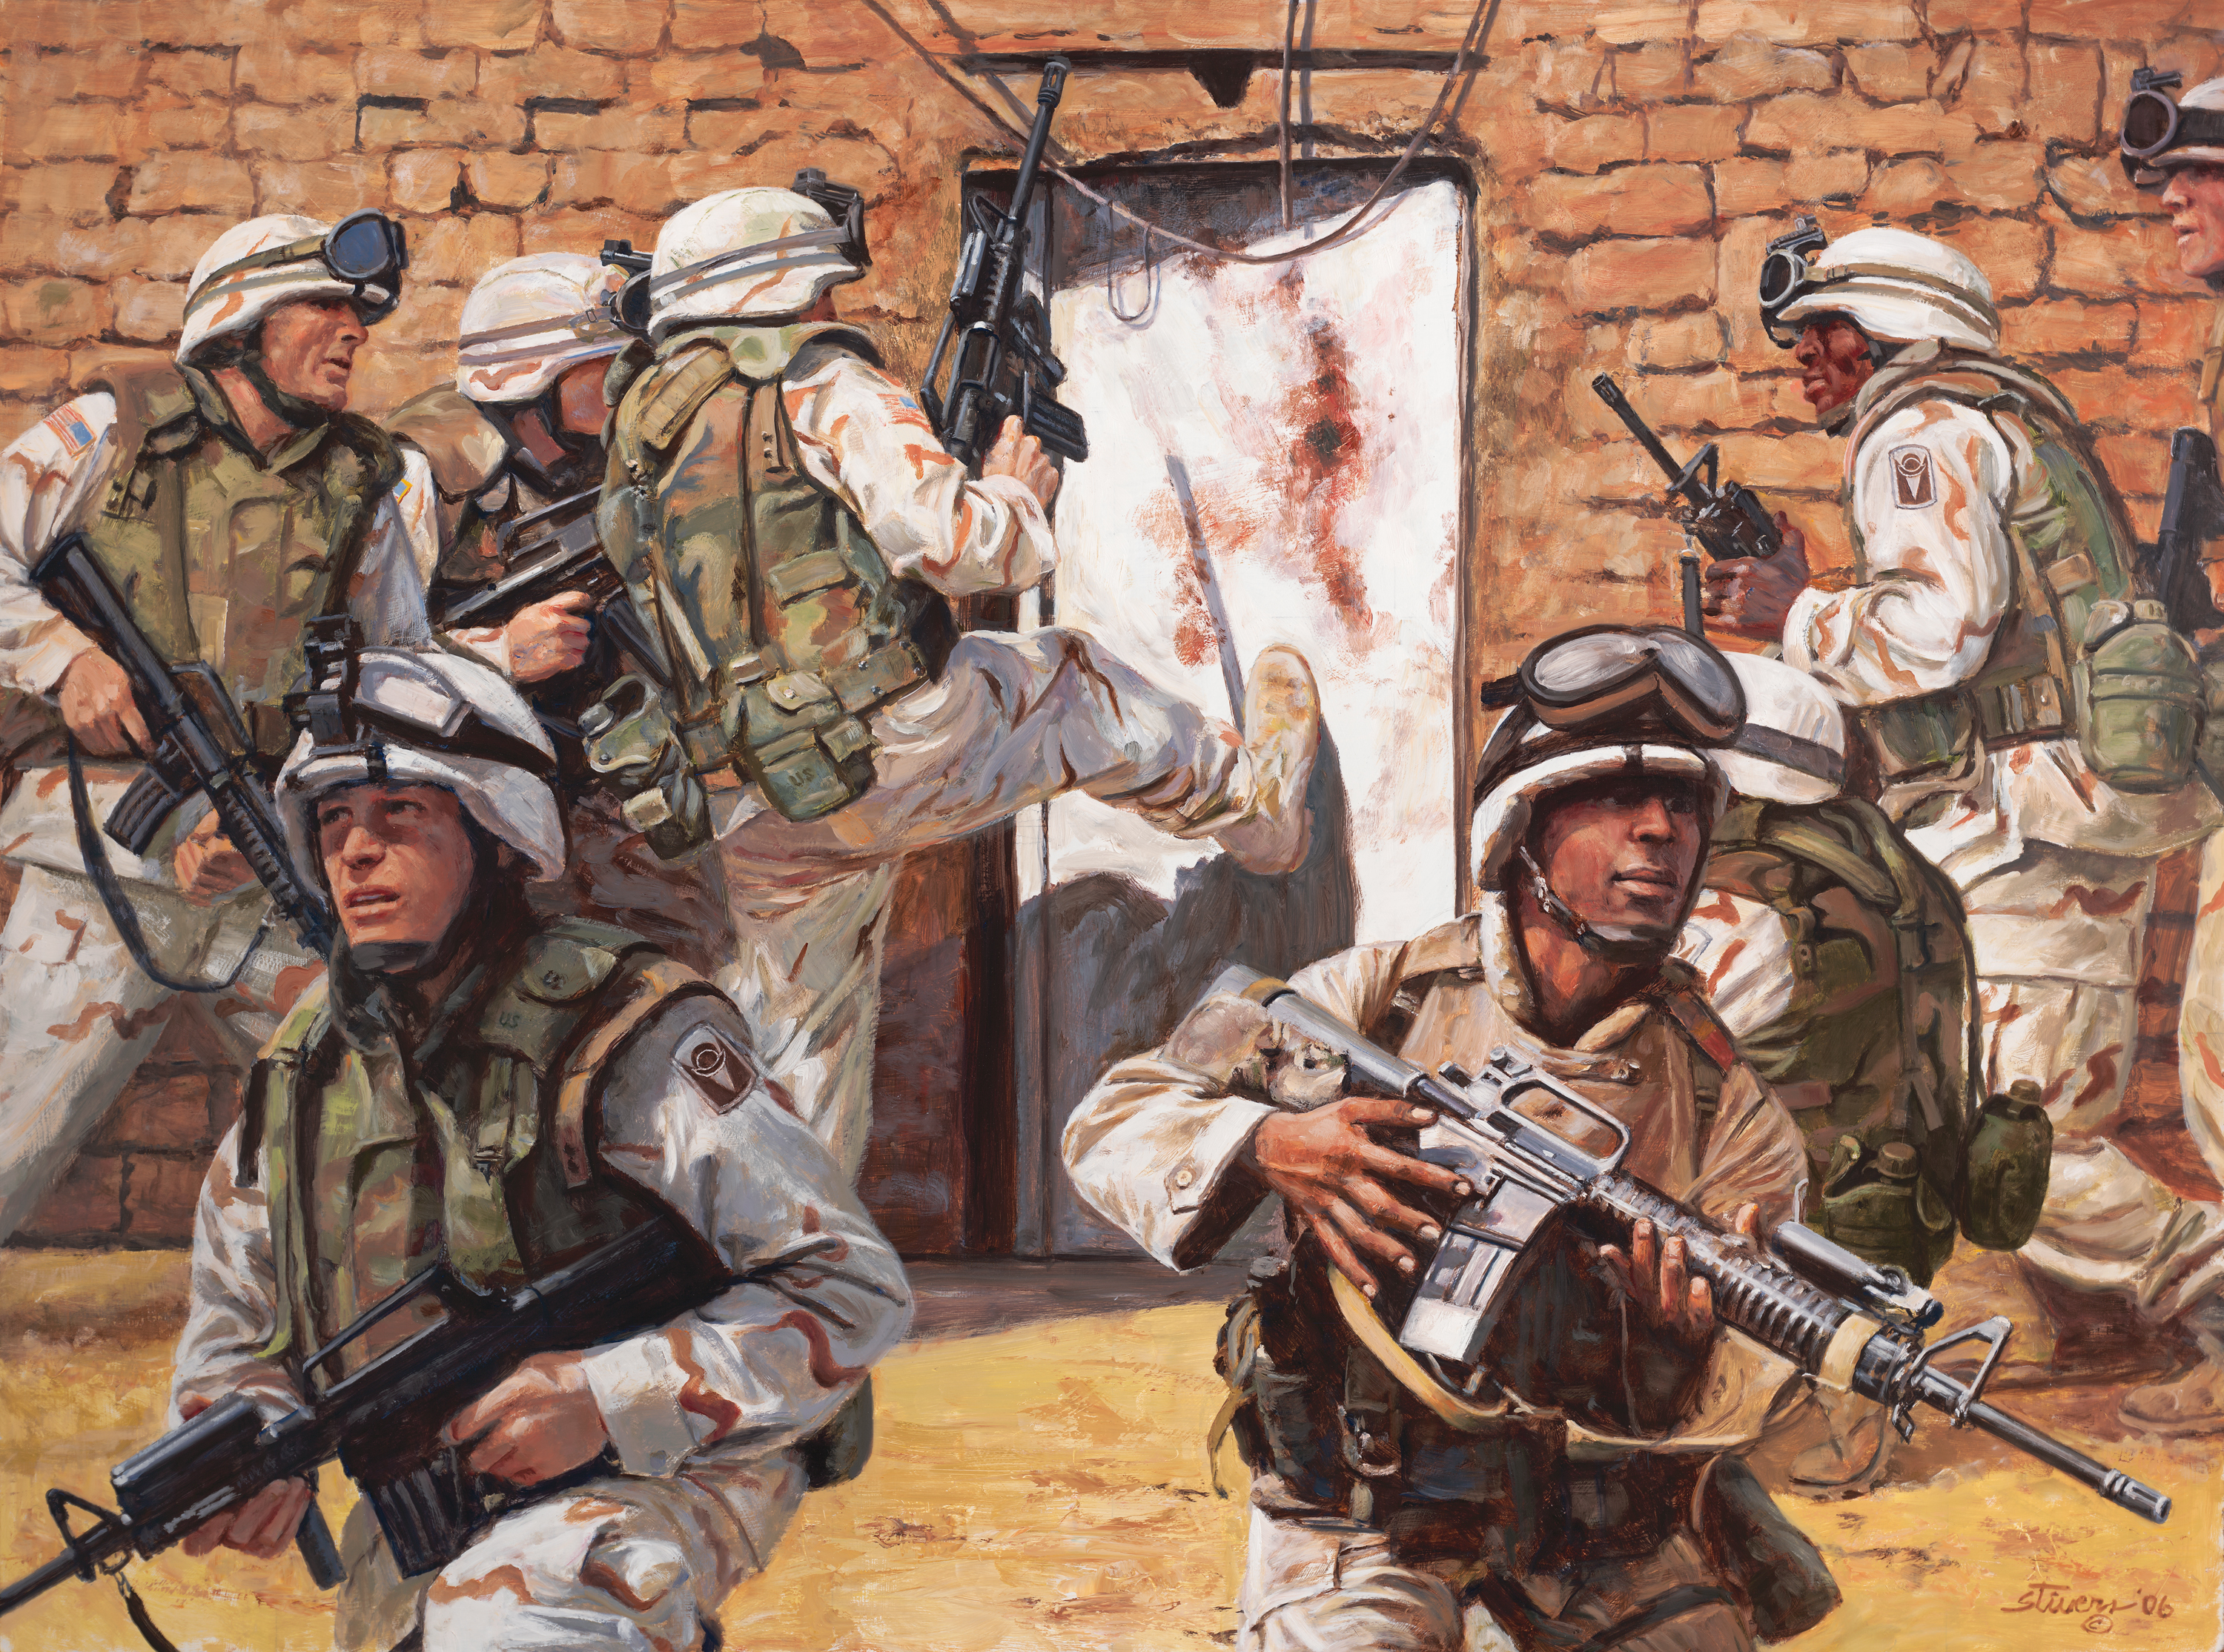 Capture at Ar Ramadi by Don Stivers